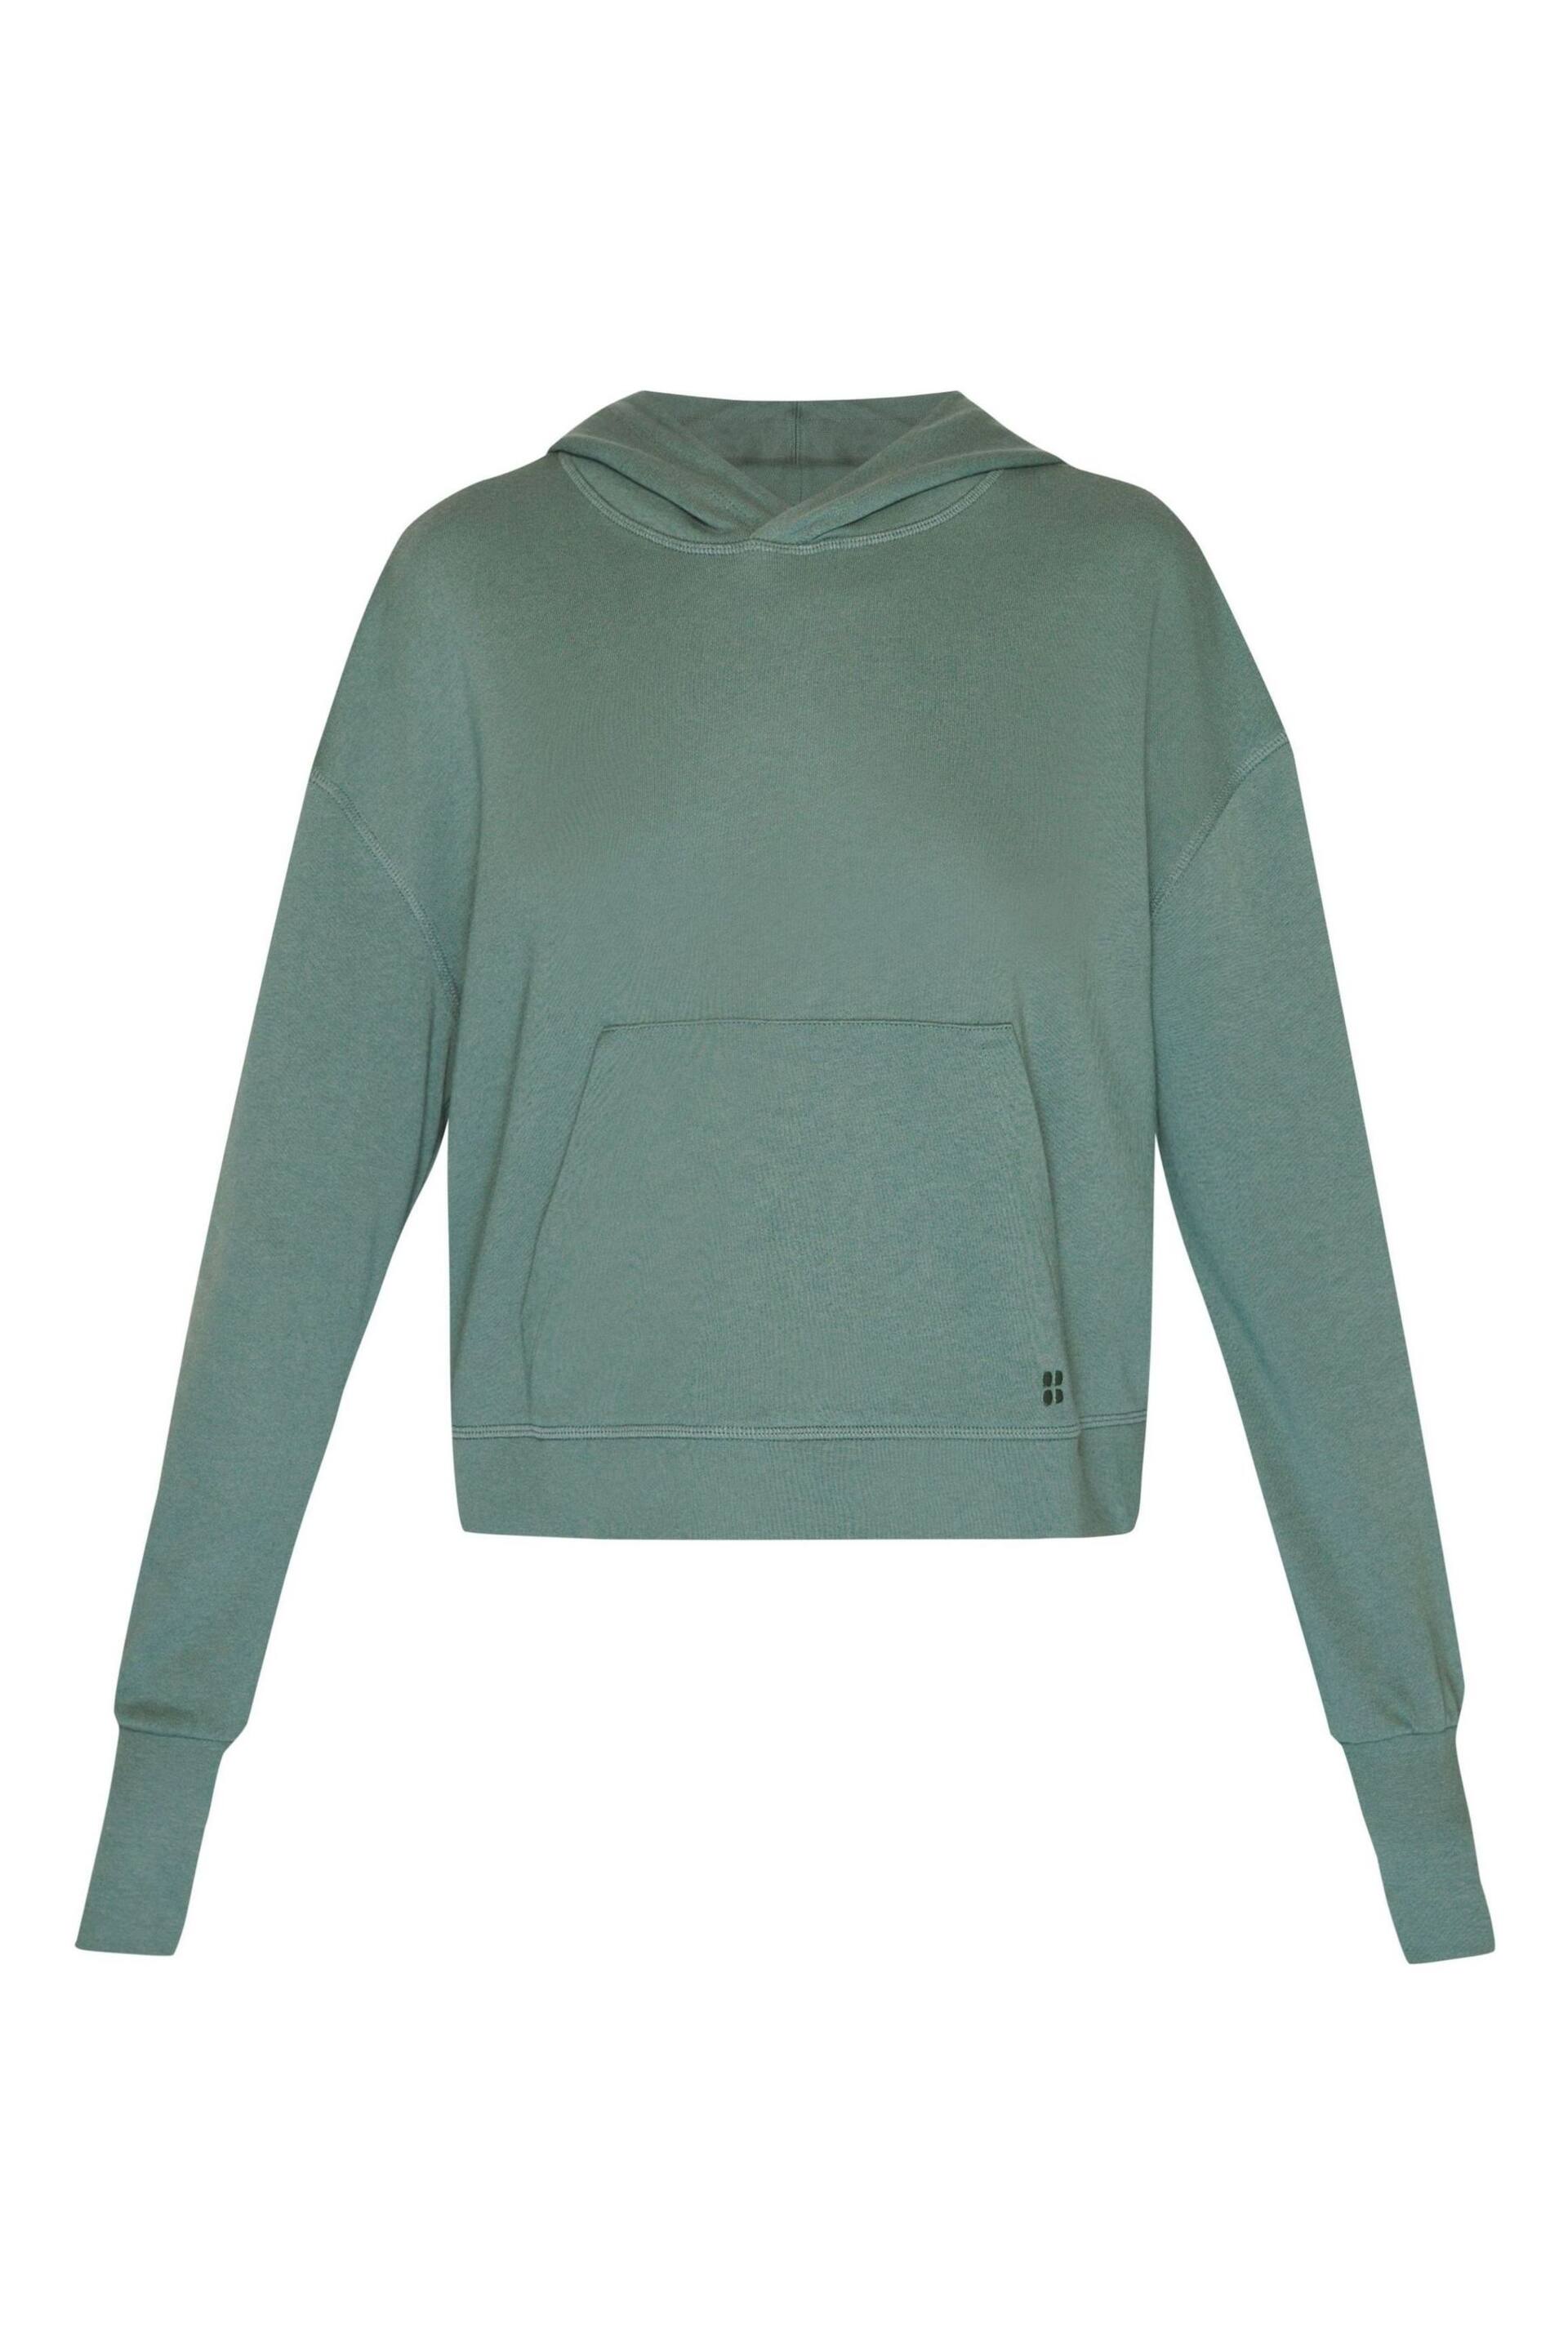 Sweaty Betty Cool Forest Green After Class Hoodie - Image 7 of 7